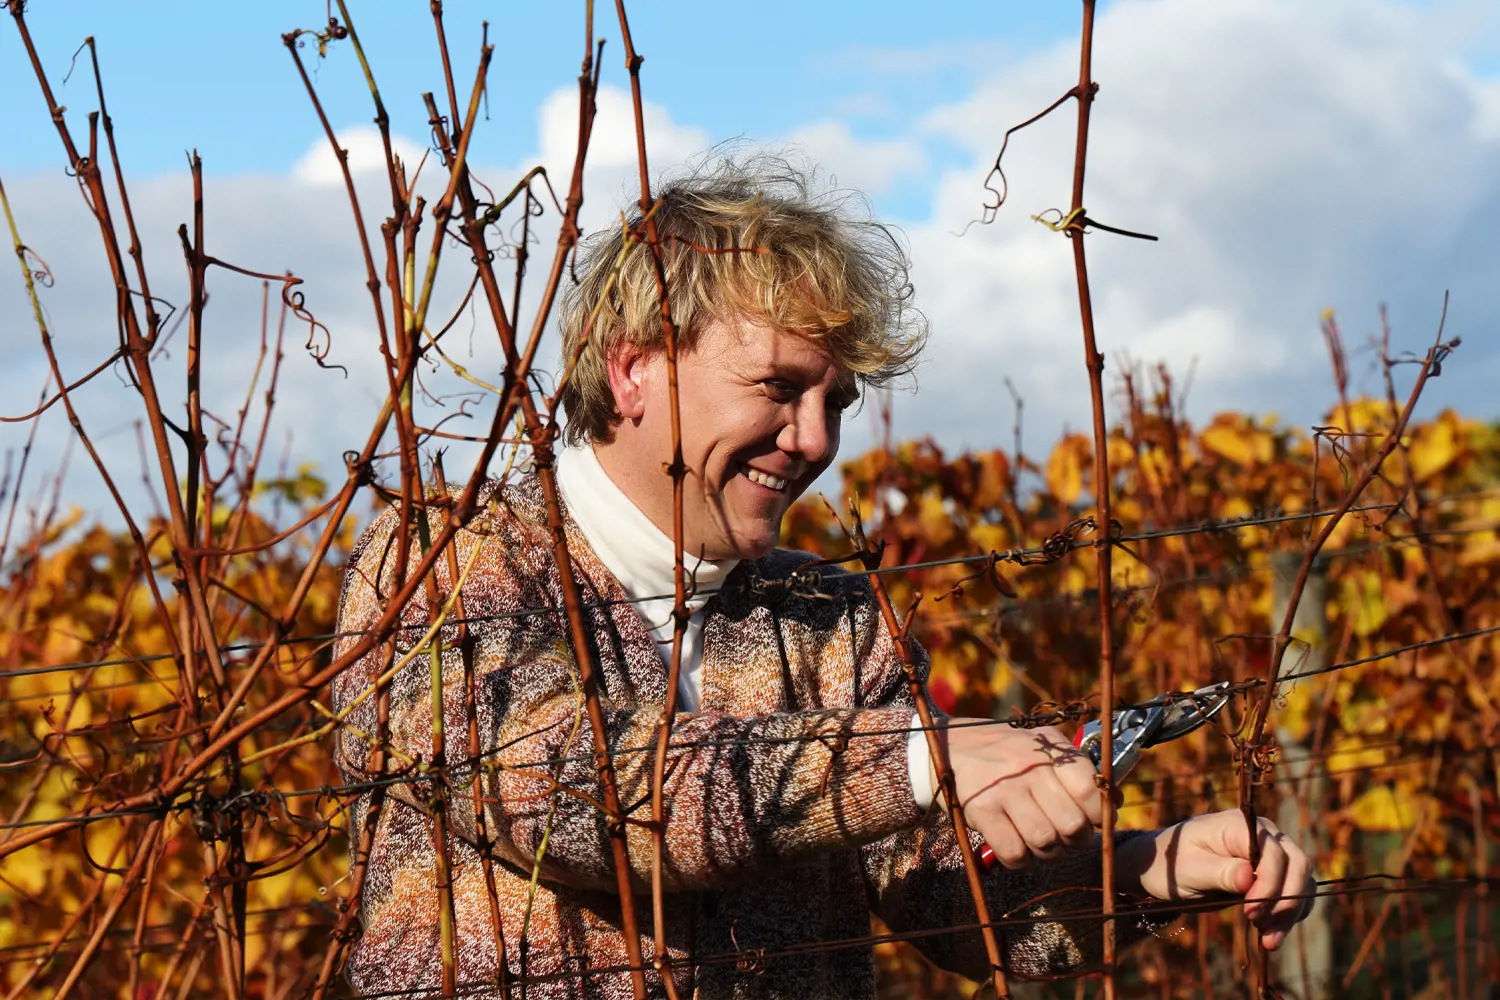 A man stands in a vineyard row full of leaves and carefully trims grape vines with a pair of secateurs